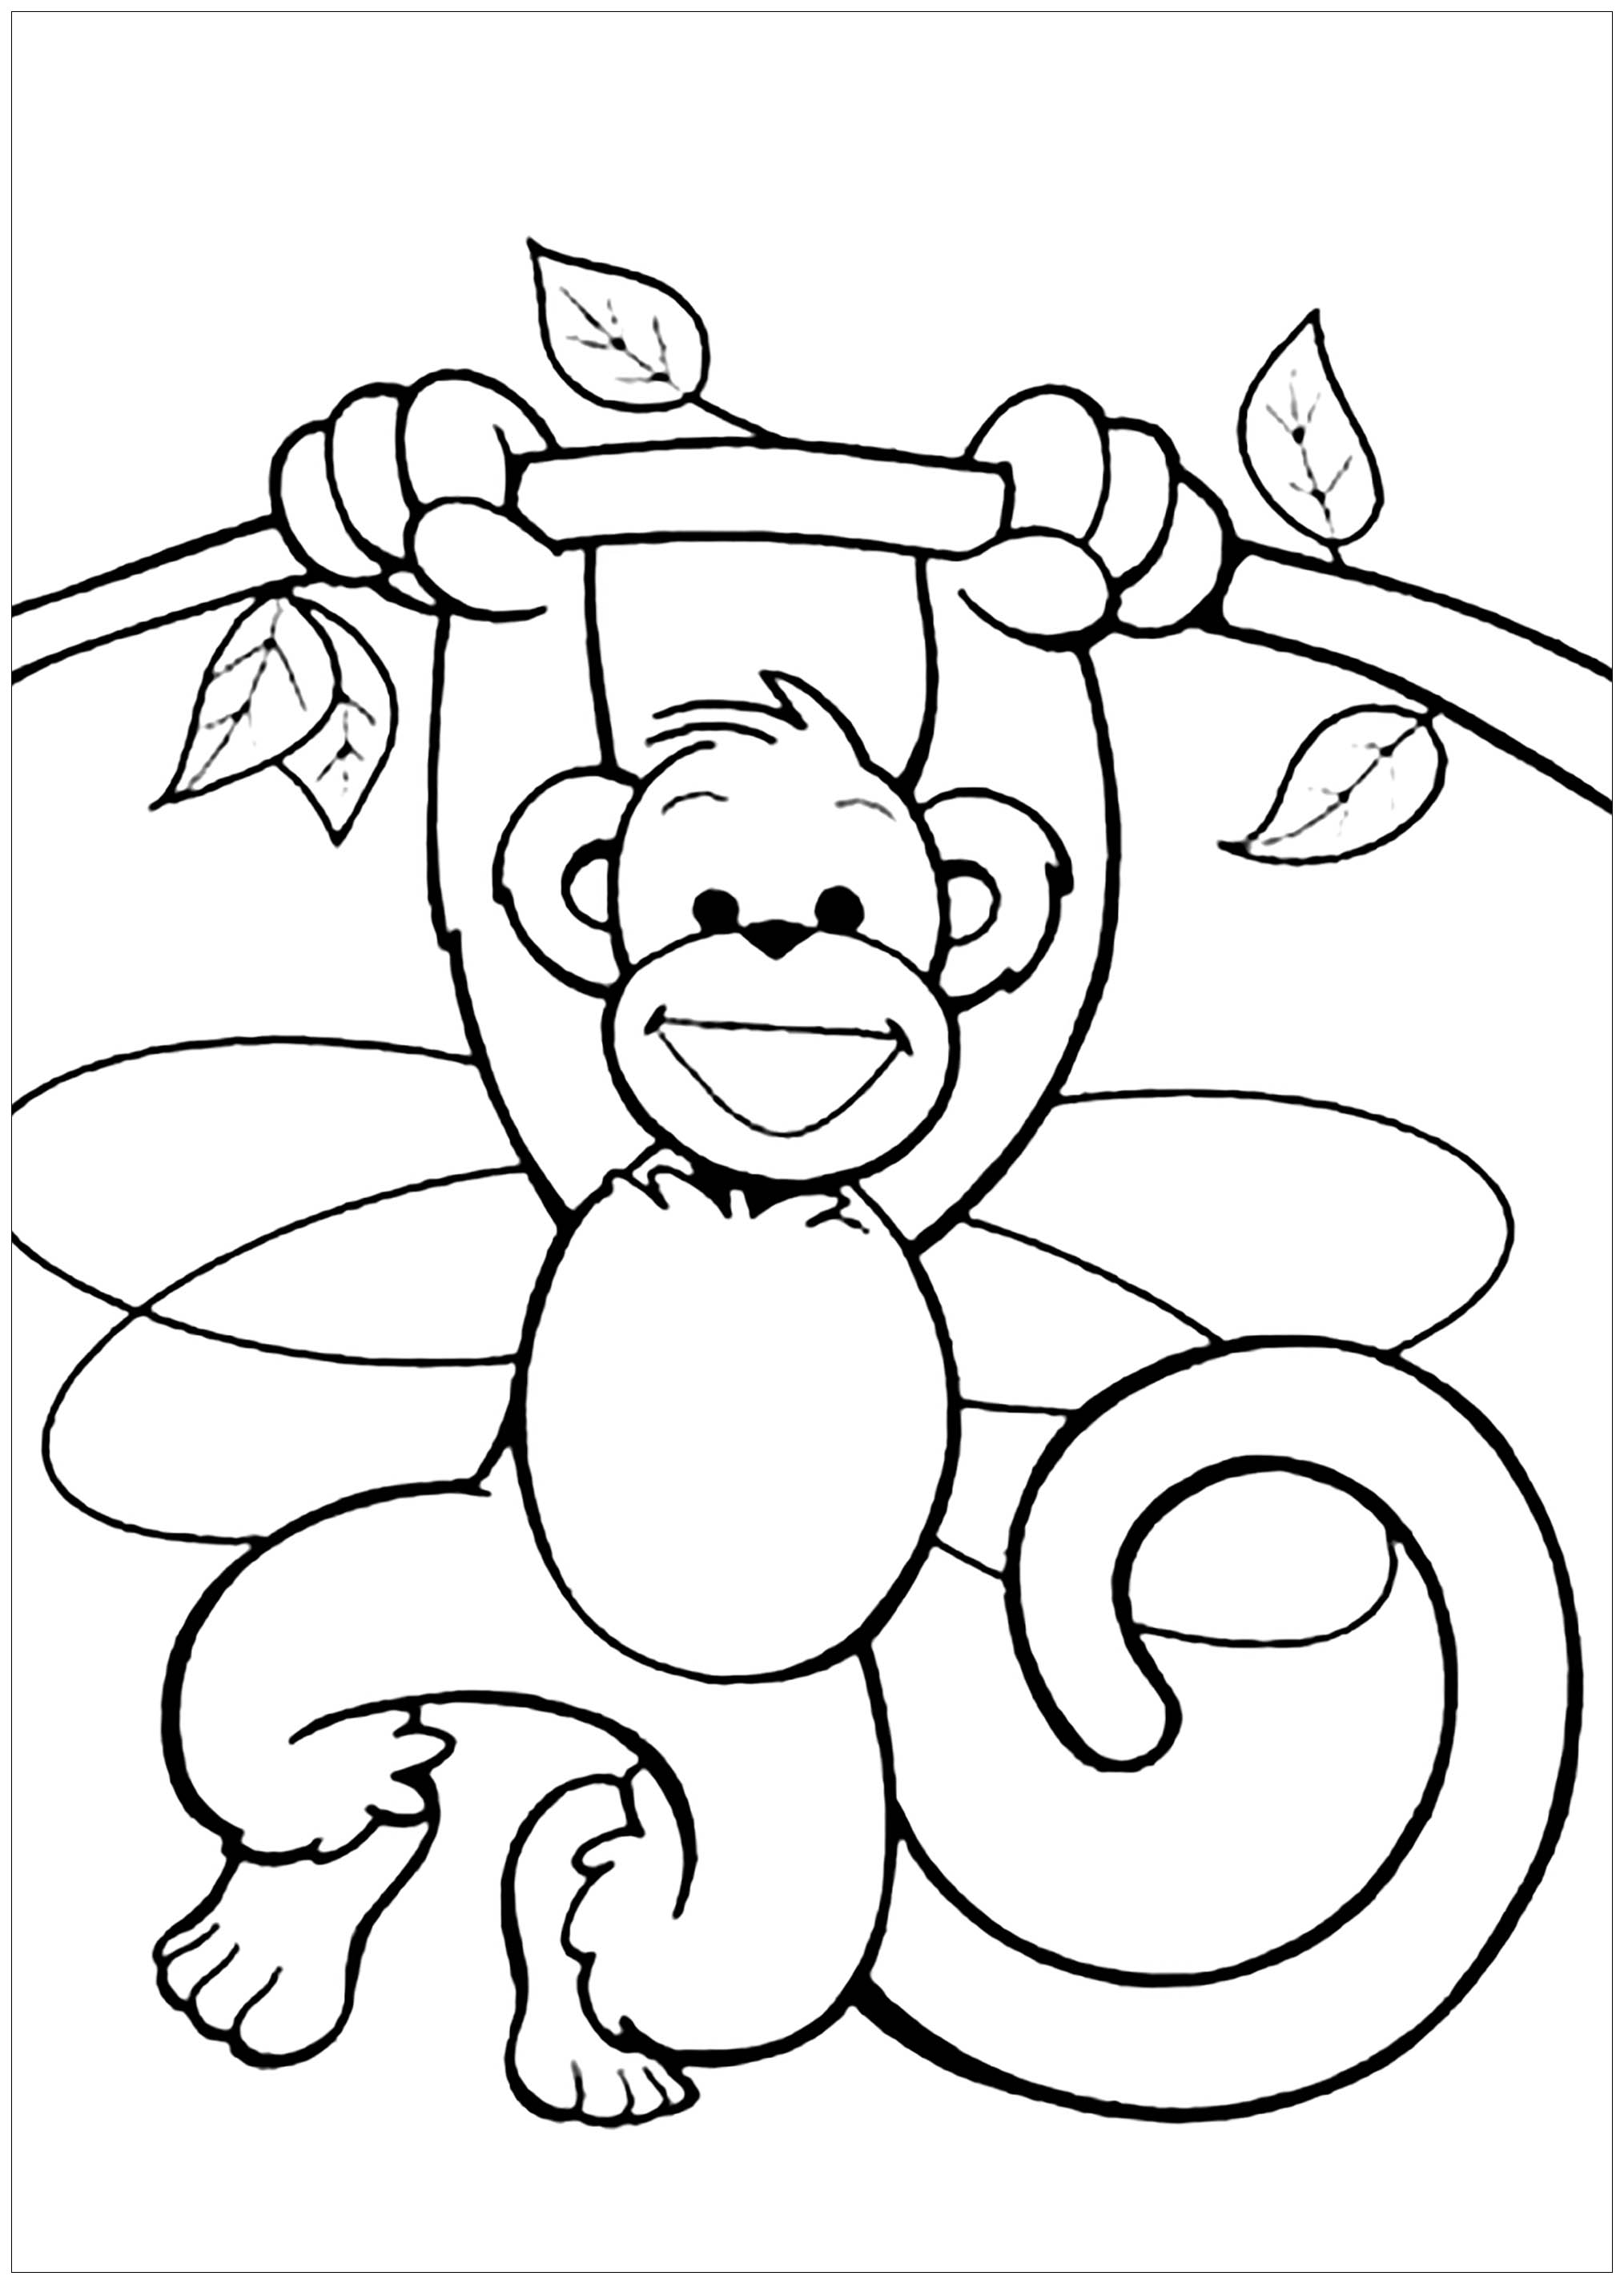 Coloring Pages Of Monkeys Monkeys To Download For Free Monkeys Kids Coloring Pages